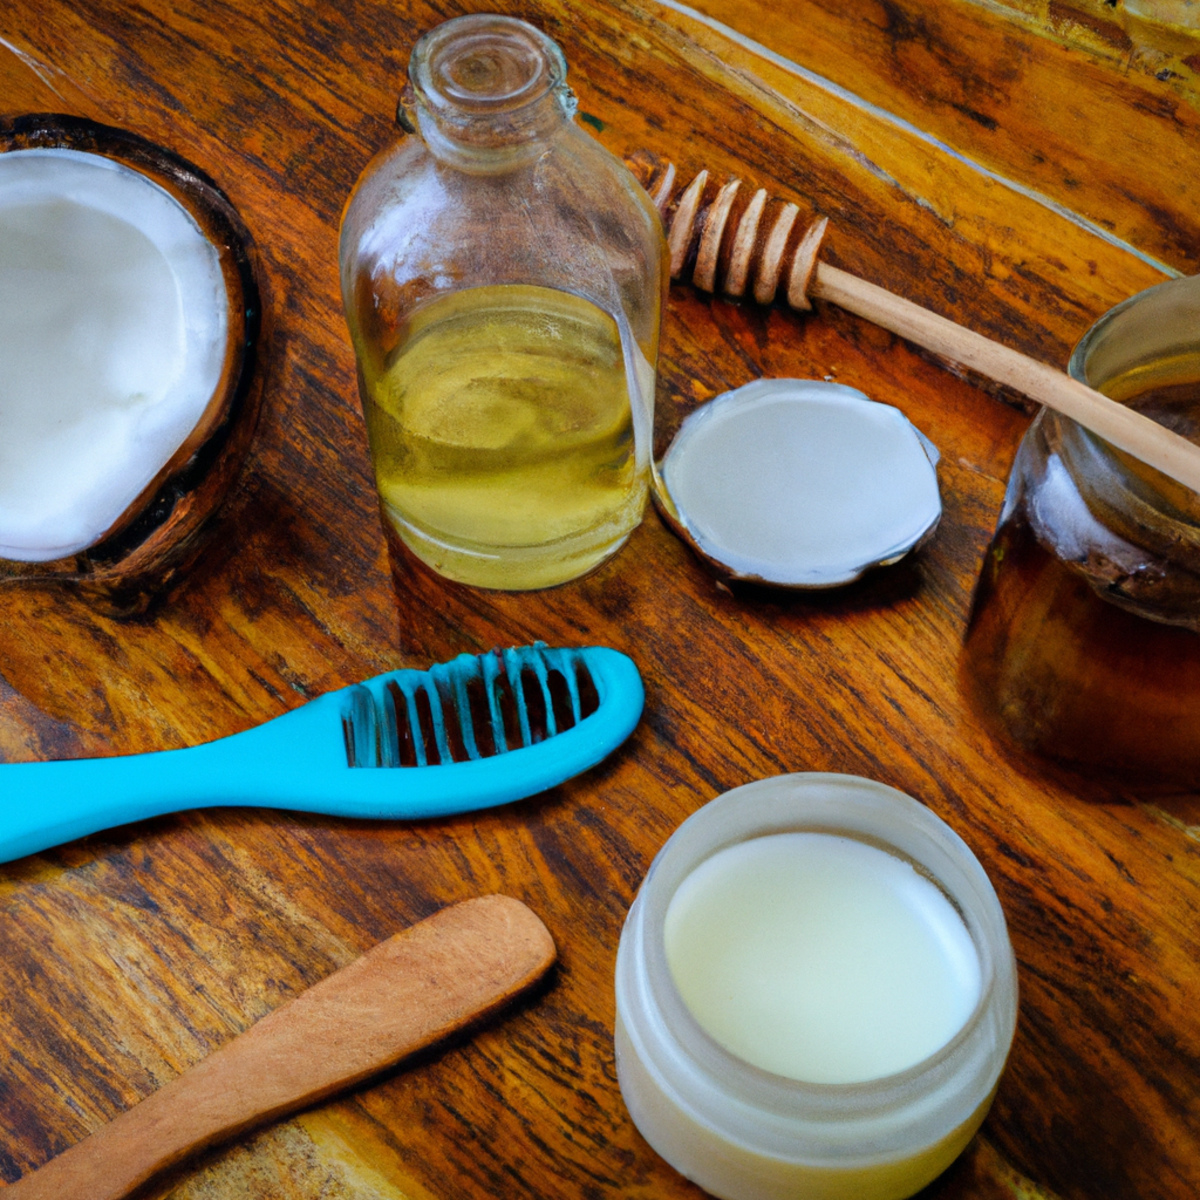 DIY hair care items on a wooden table, including coconut oil, argan oil, honey, mashed avocado, and rosemary.